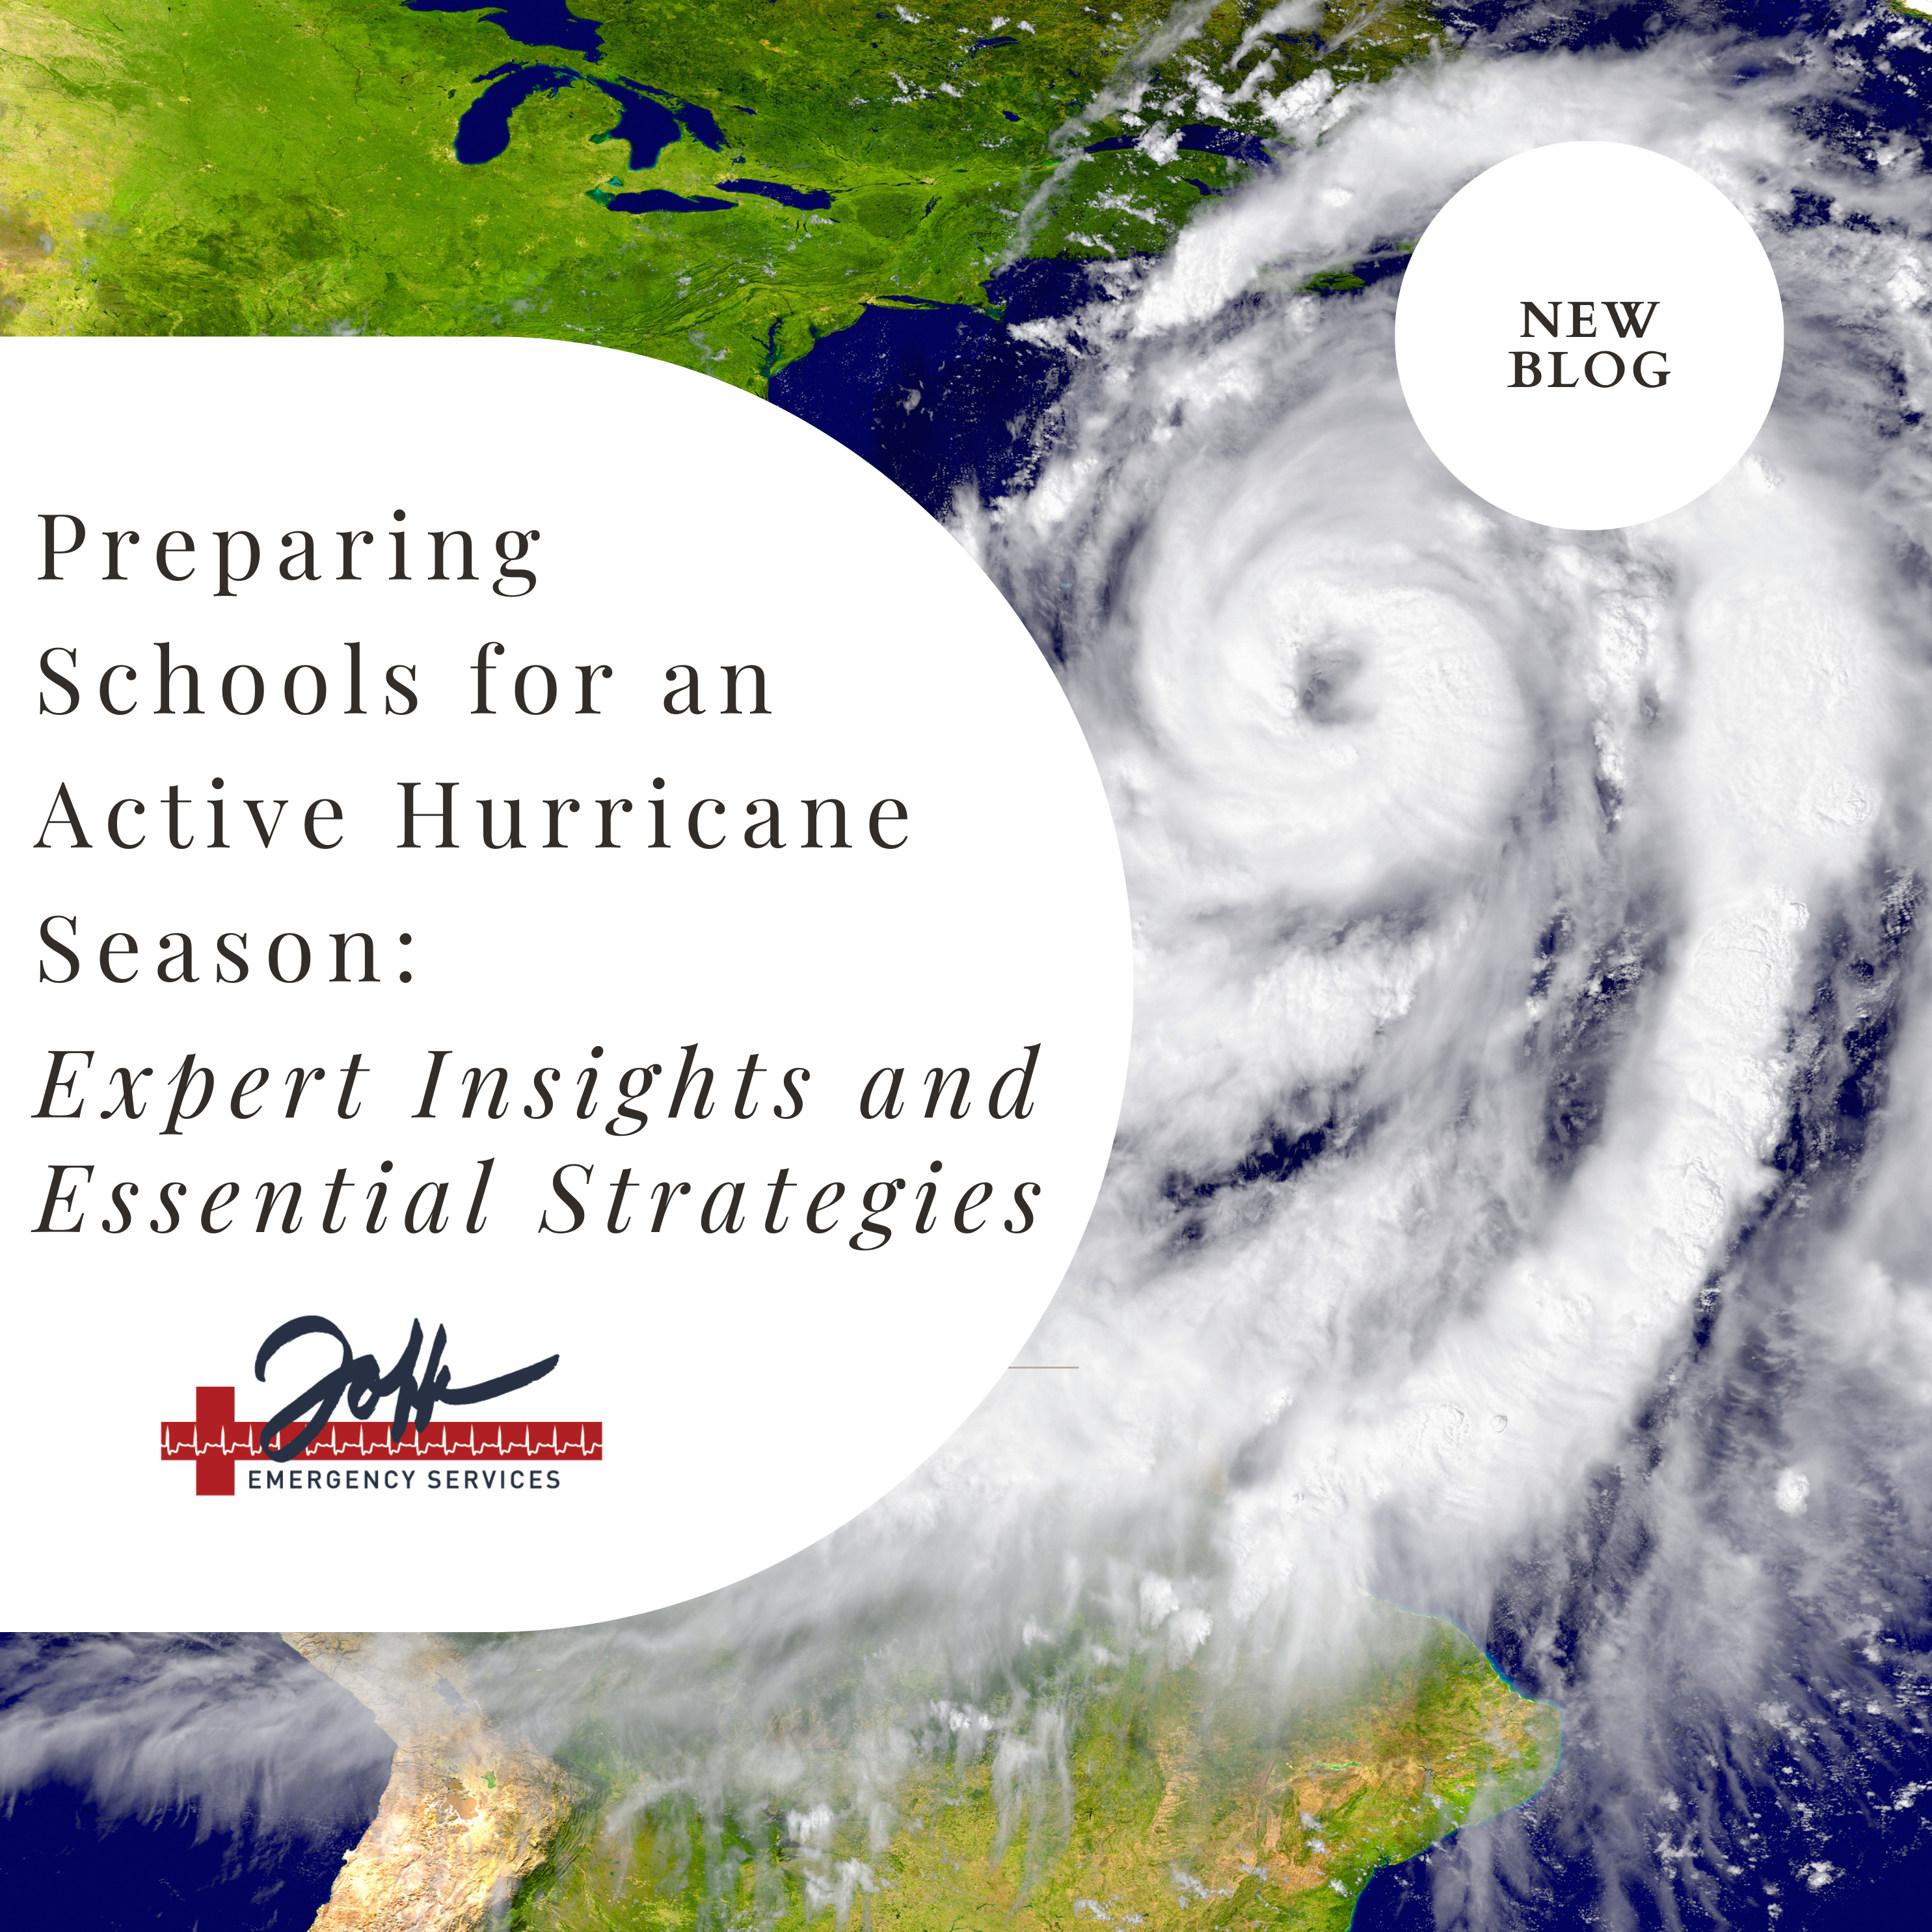 Preparing Schools for an Active Hurricane Season: Expert Insights and Essential Strategies